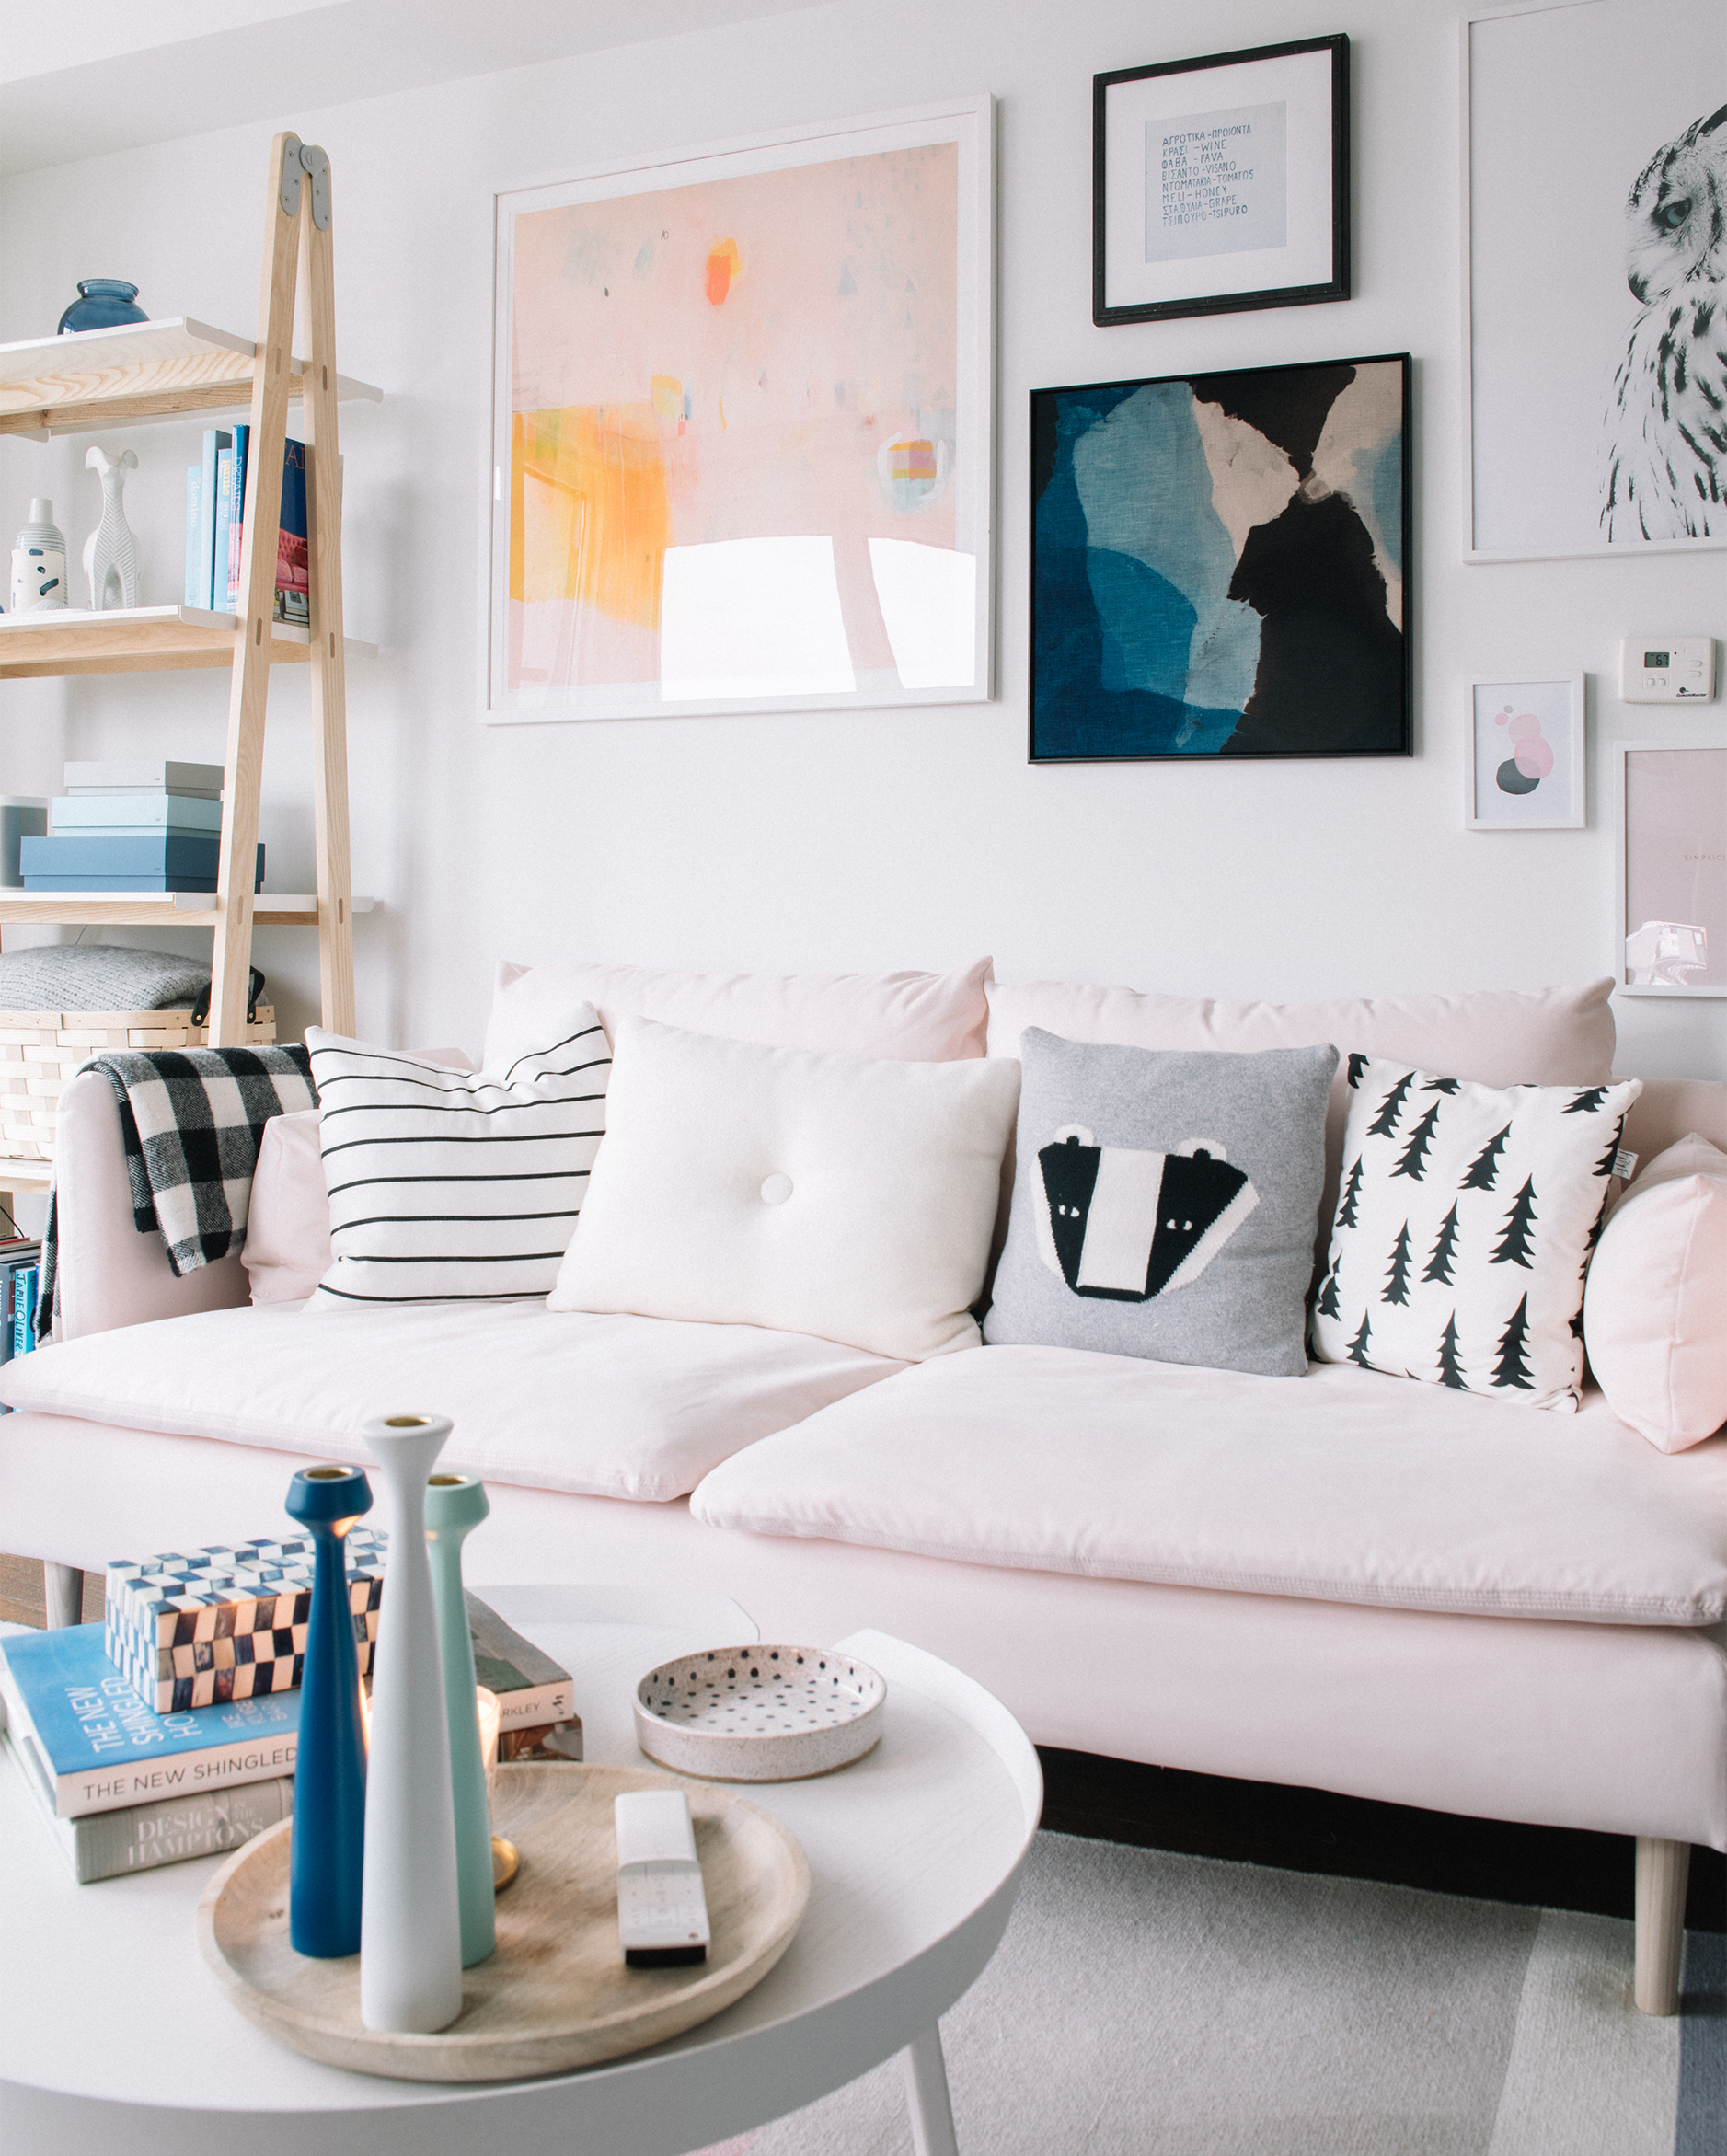 20 Ways To Decorate With Millennial Pink